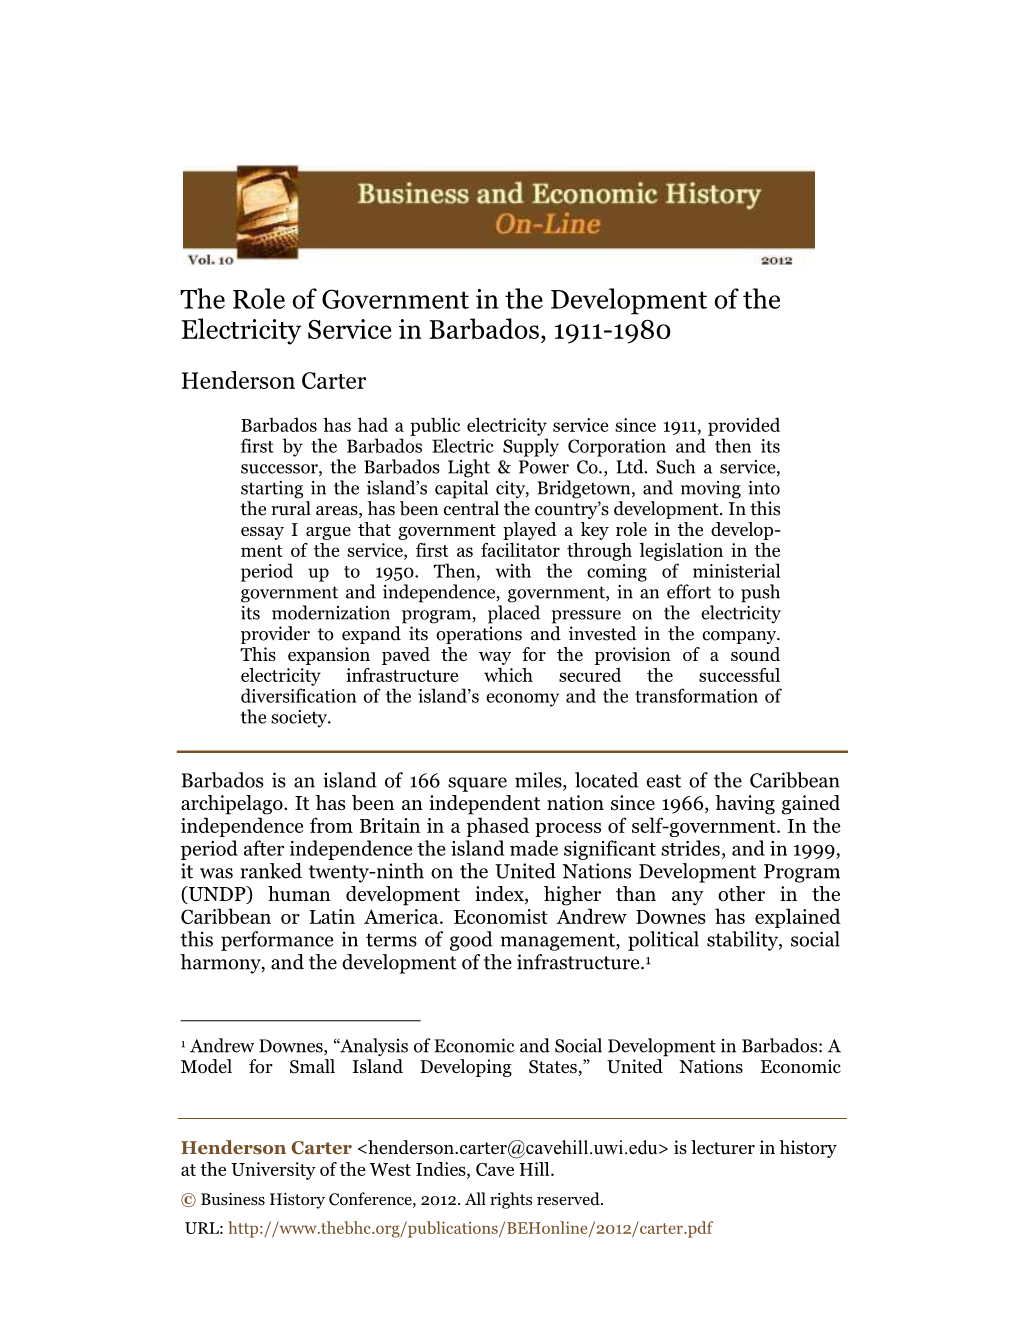 The Role of Government in the Development of the Electricity Service in Barbados, 1911-1980